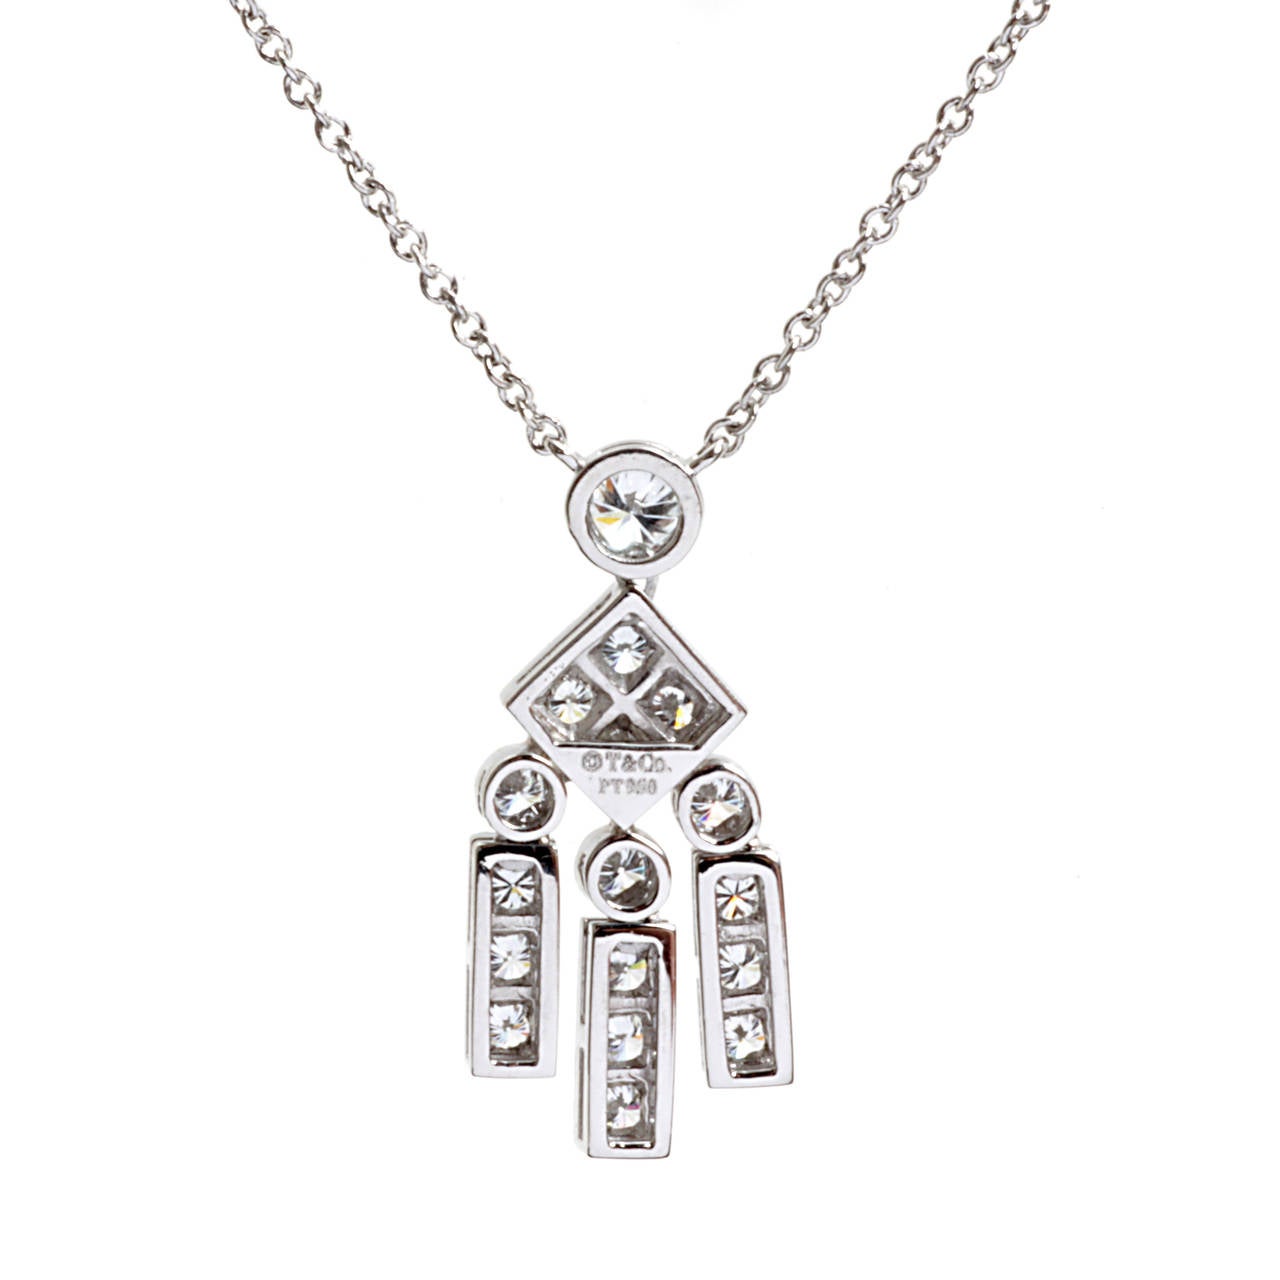 Radiance is the hallmark of this gleaming Platinum necklace from Tiffany & Co.’s Legacy collection. 17 Round Brilliant Cut Diamonds are prominently placed in all 4 segments of the pendant, which is itself composed of dangling Platinum circles,